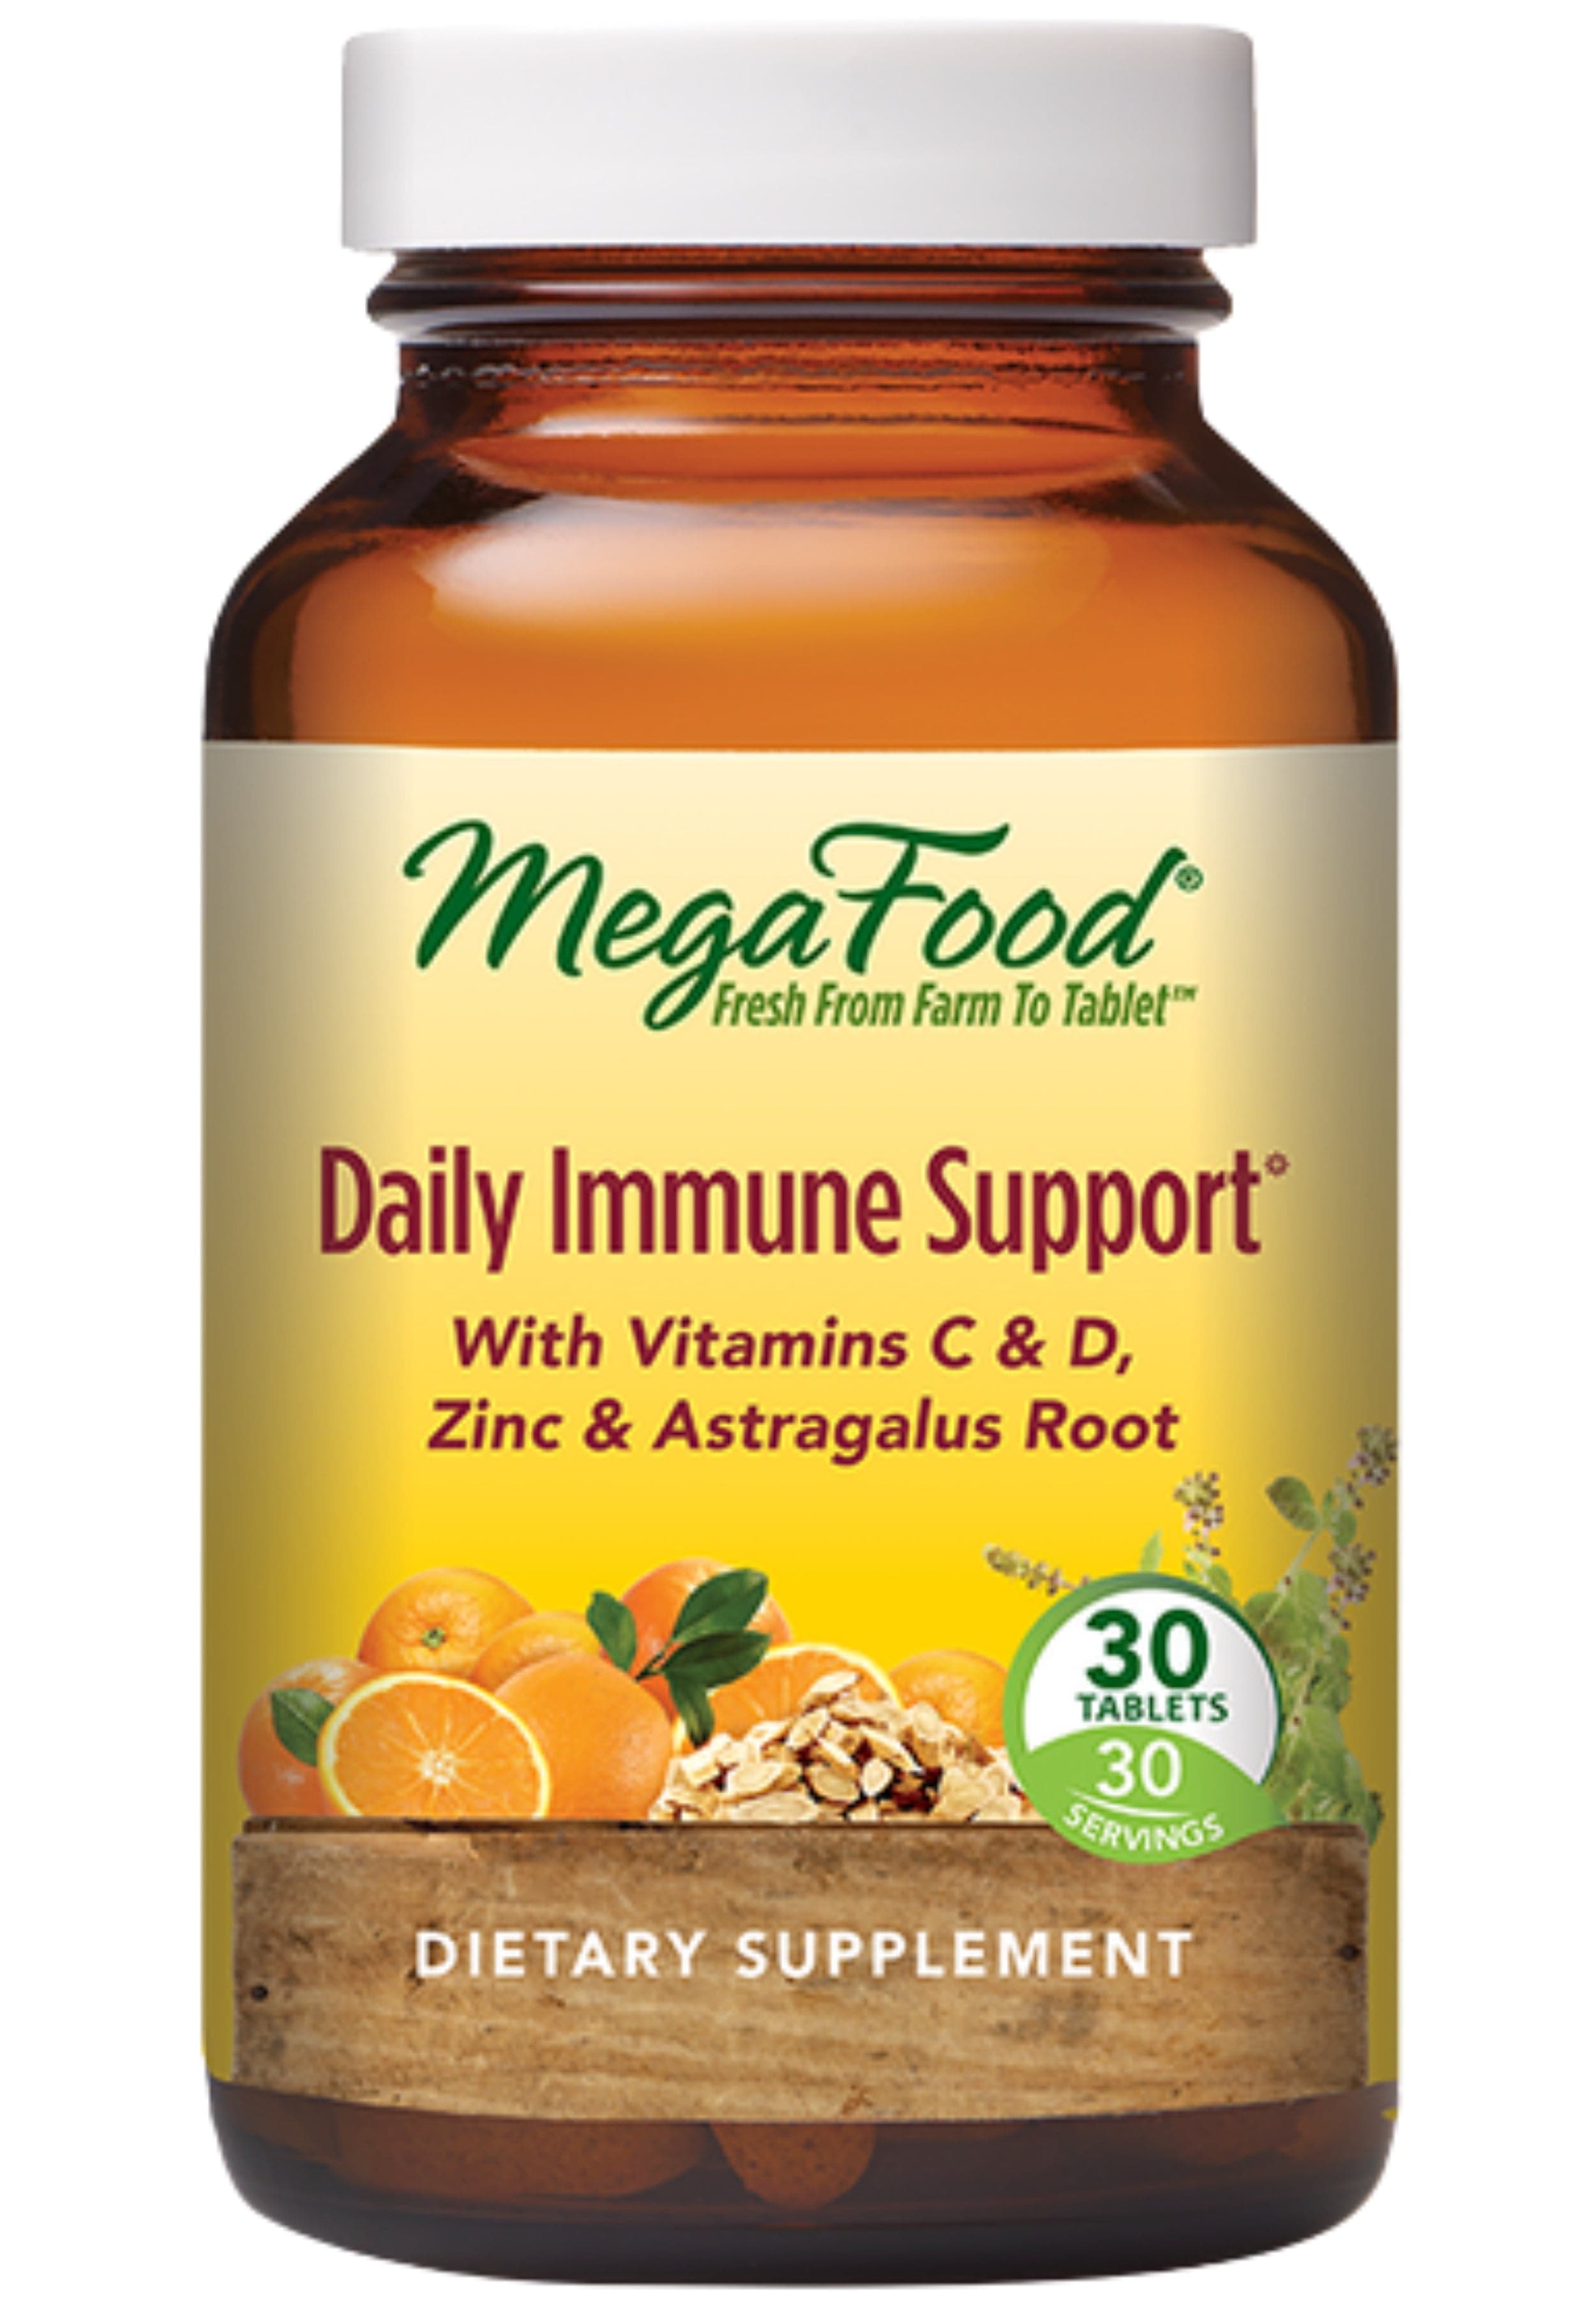 MegaFood Daily Immune Support